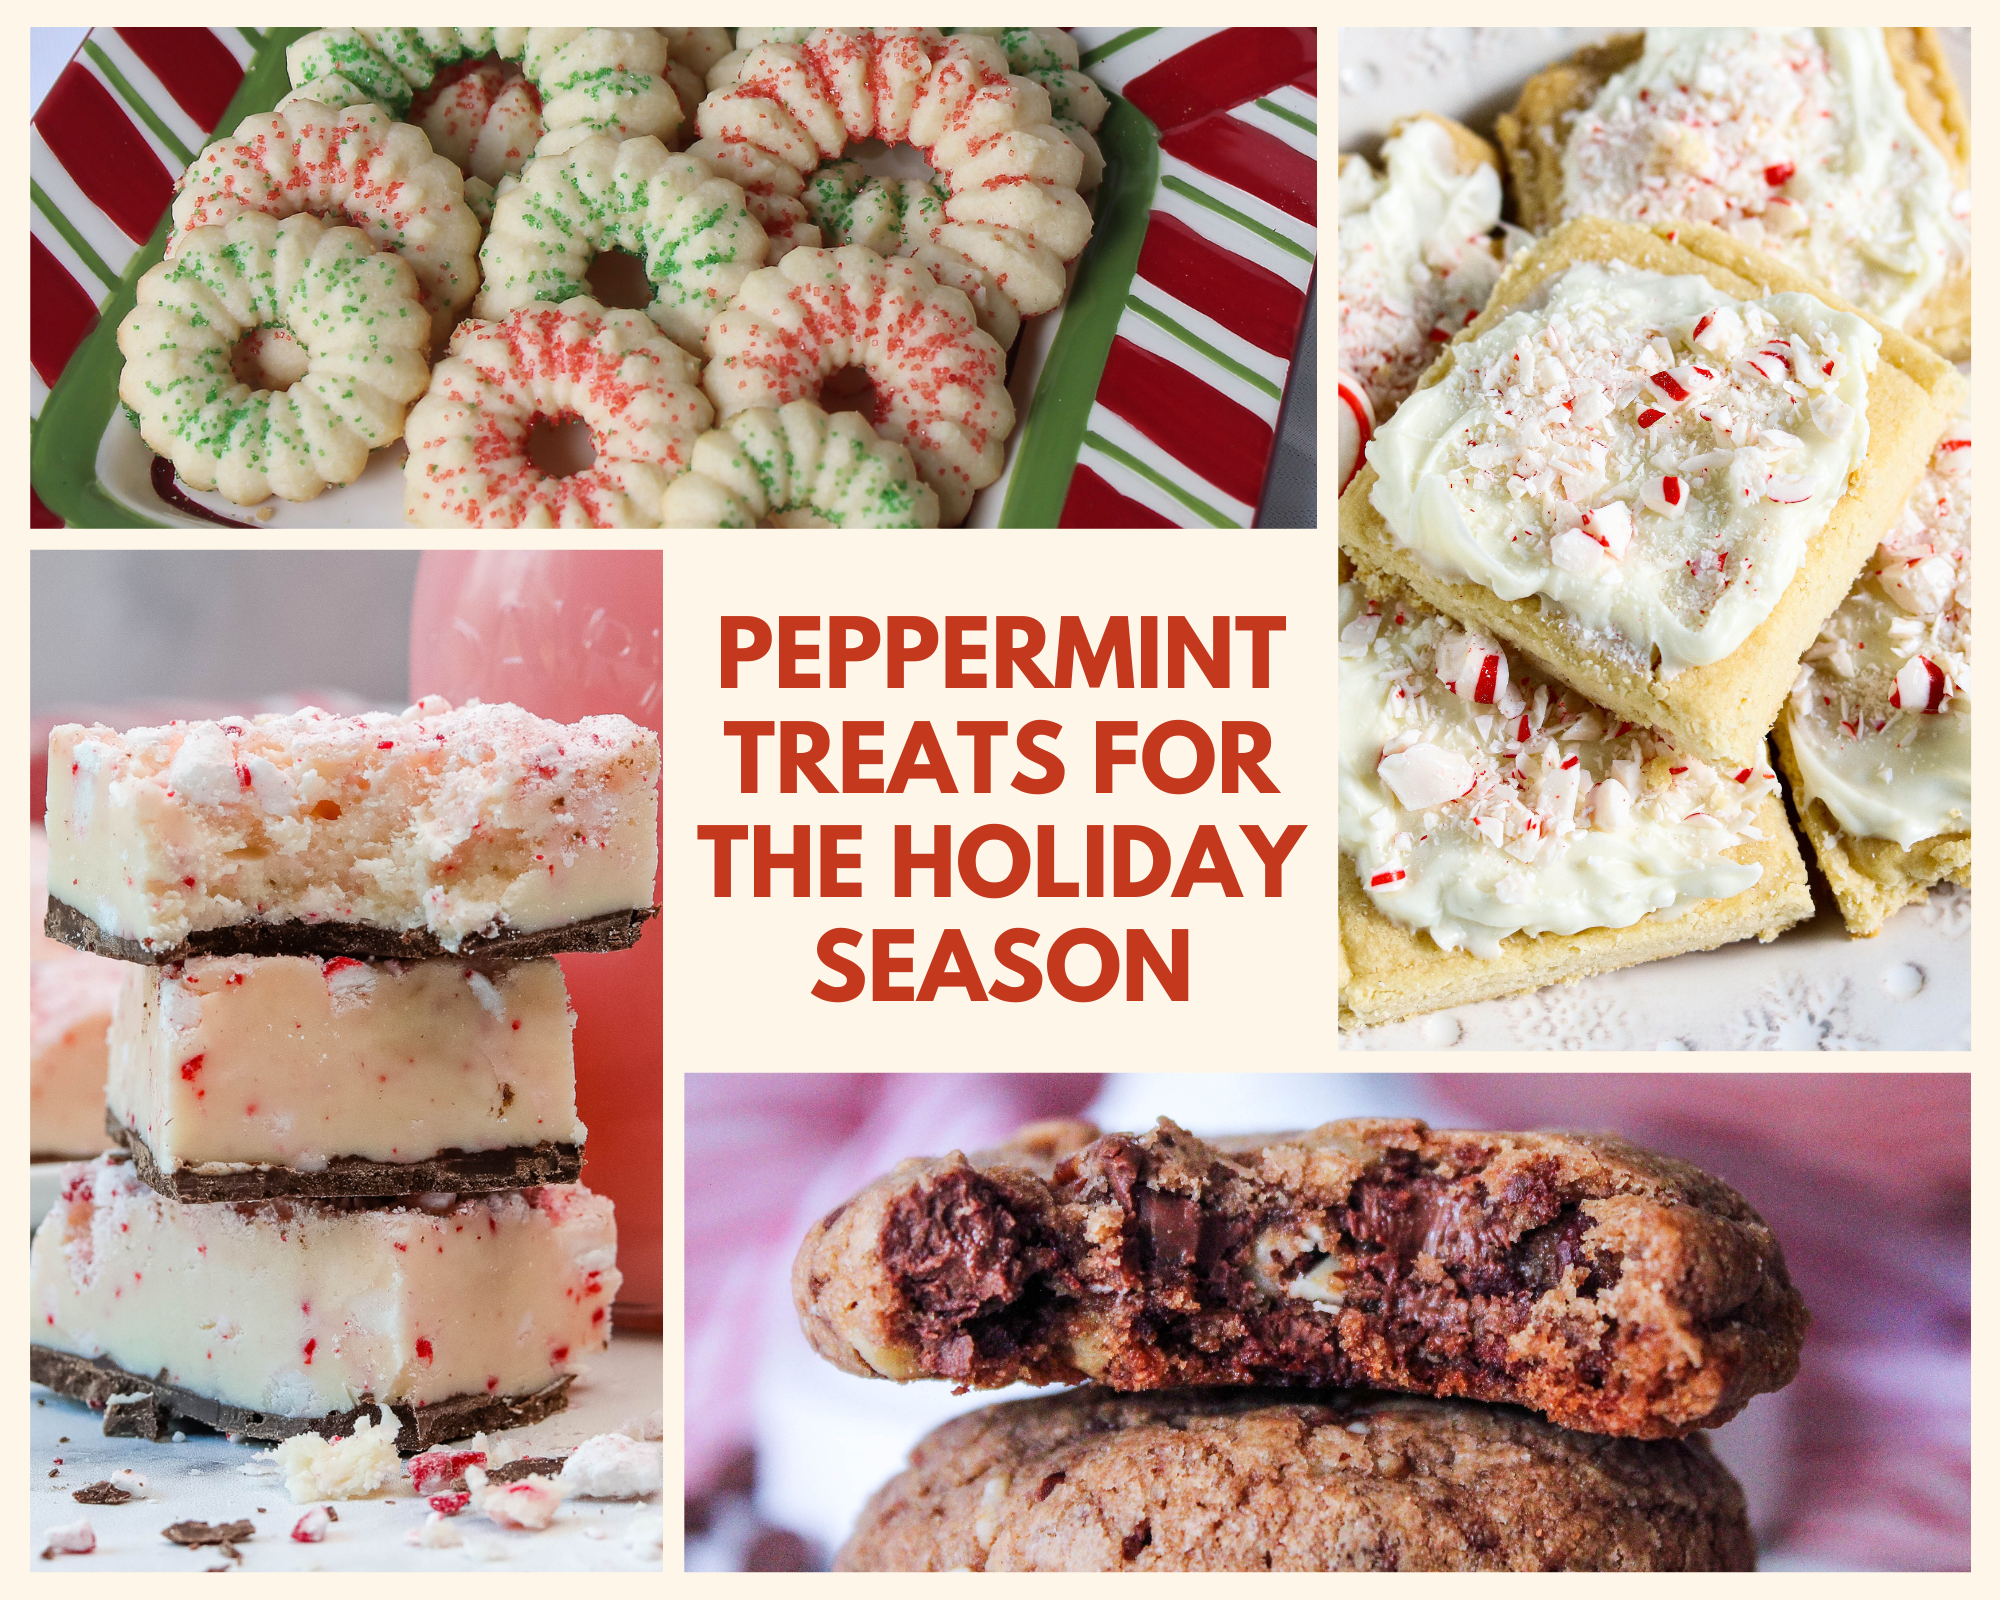 Peppermint Treats for the Holiday Season